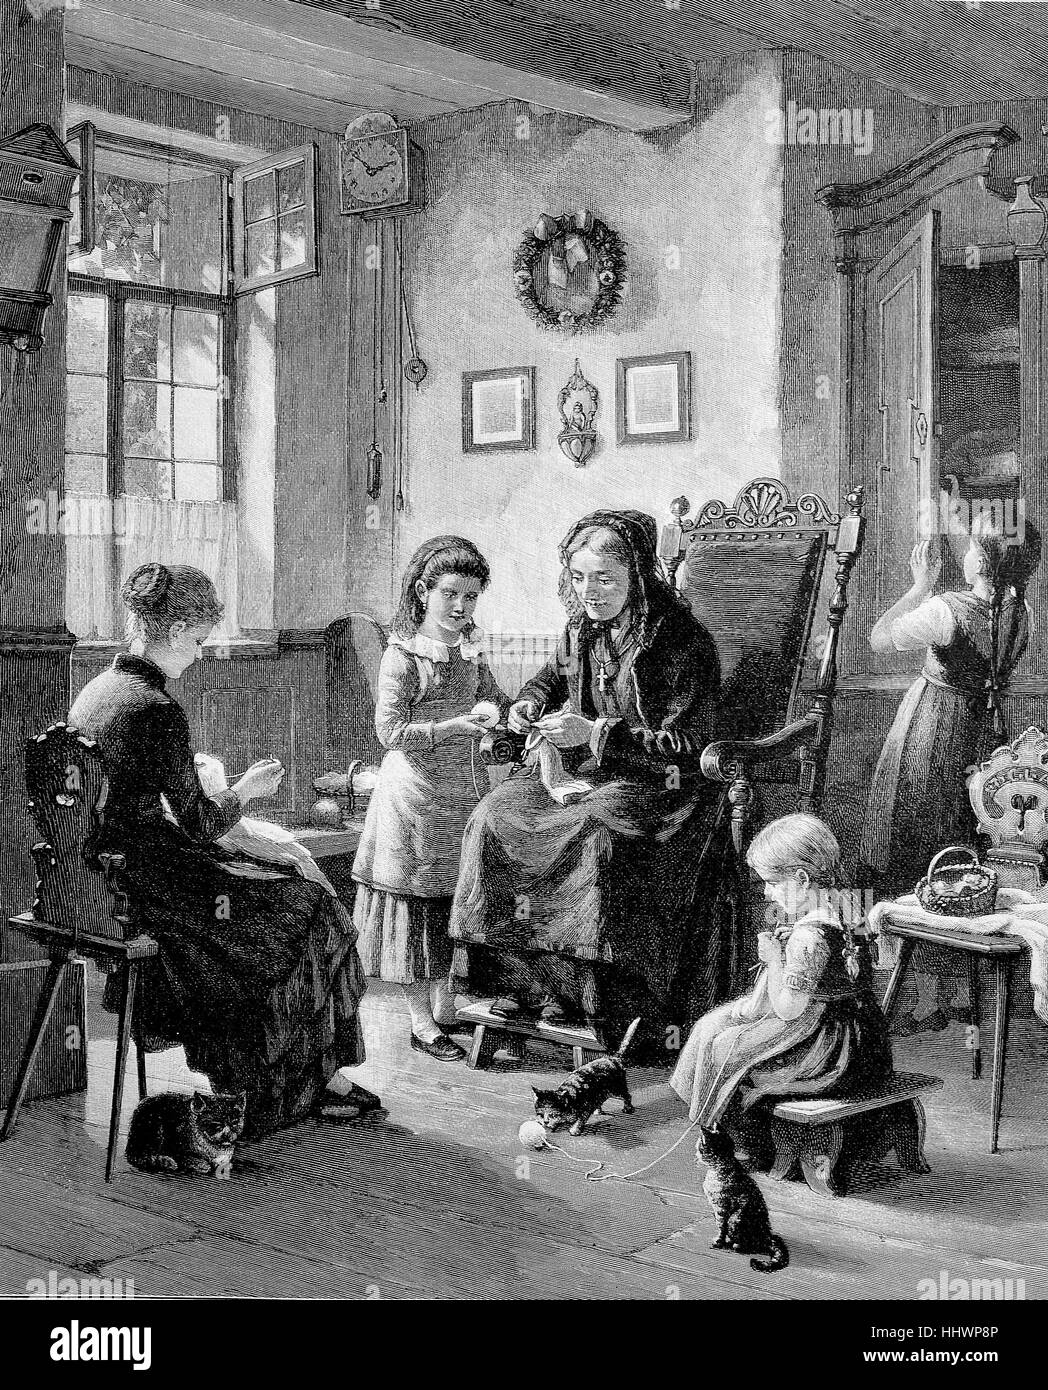 Knitting school, teacher teaches young girls knitting, according to a painting by H. Werner, Germany, historical image or illustration, published 1890, digital improved Stock Photo